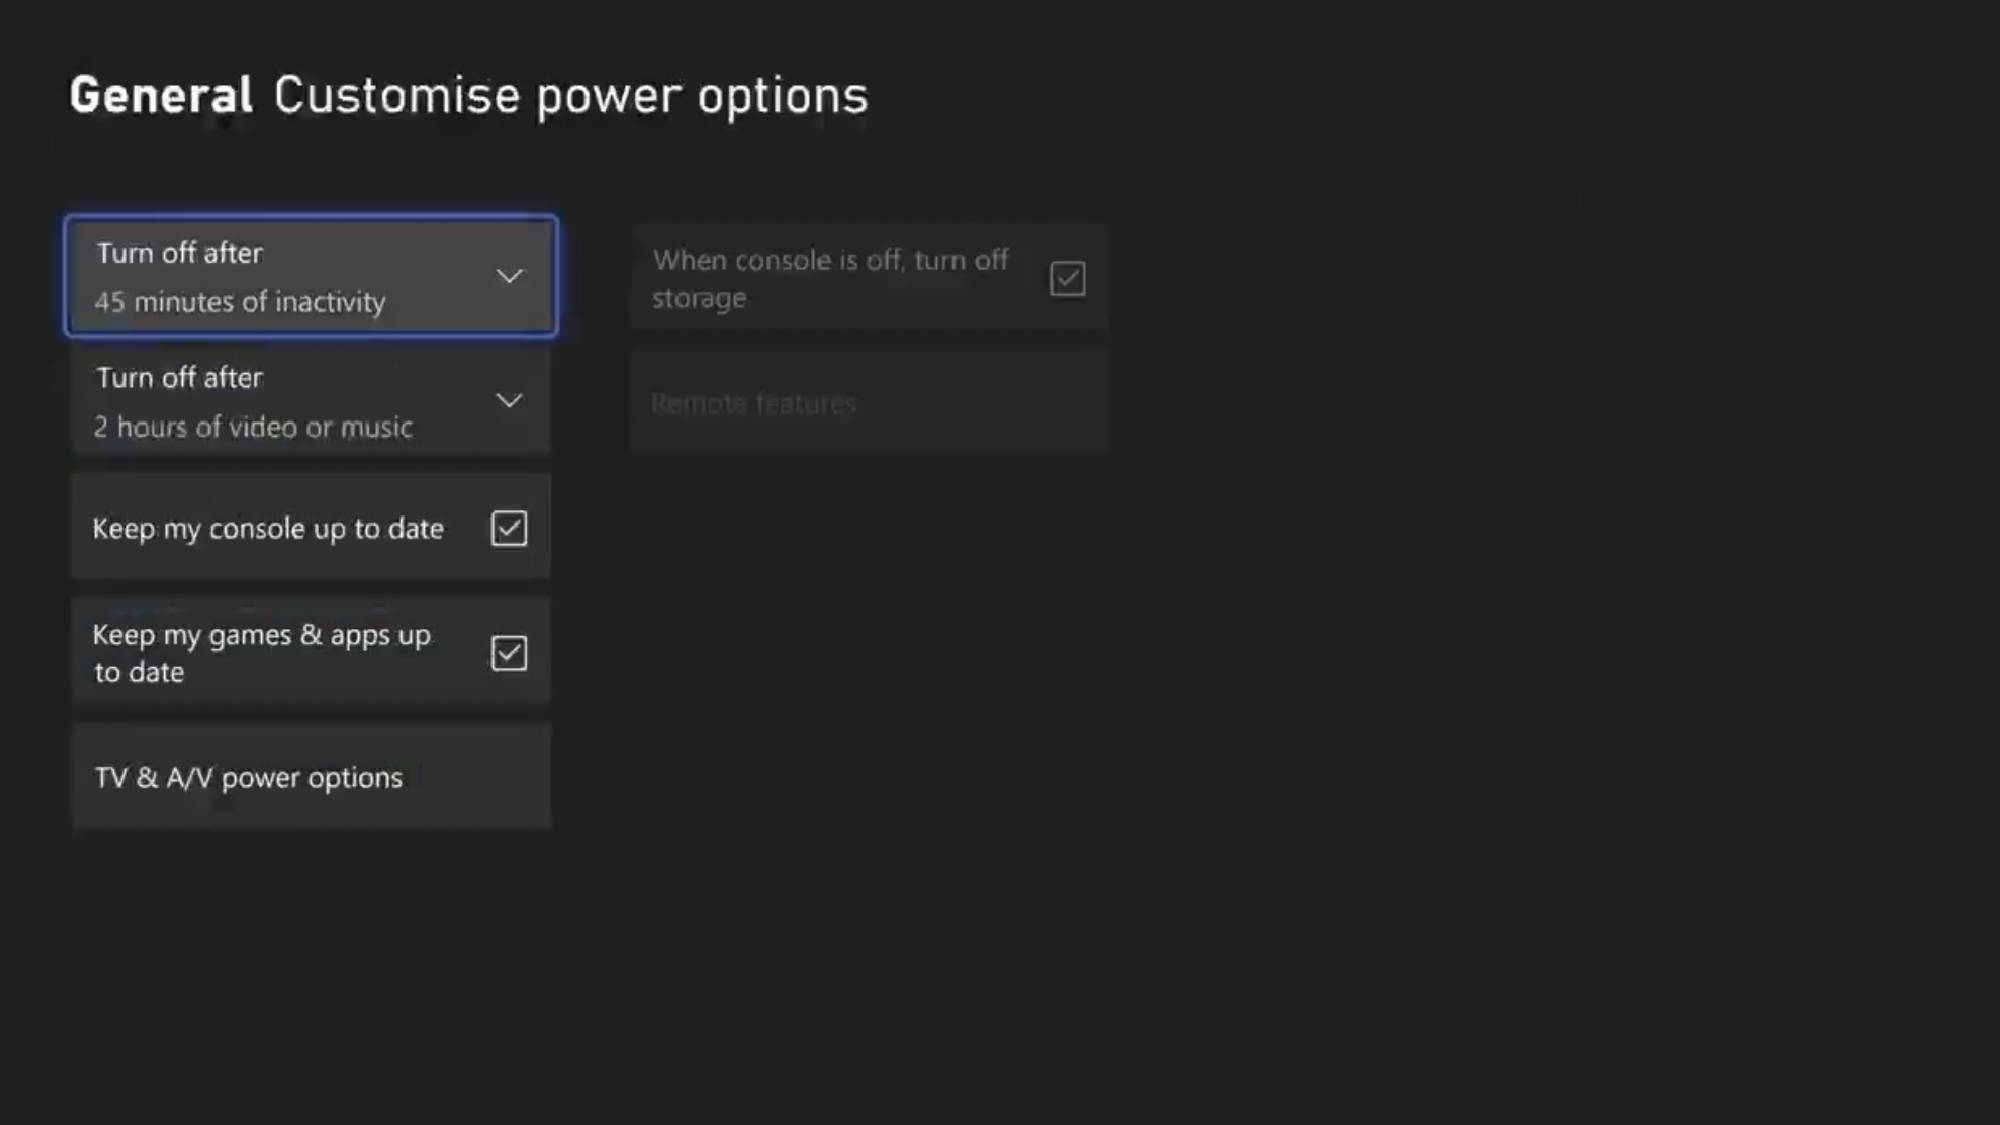 How to enable energy-saver mode on Xbox Series X